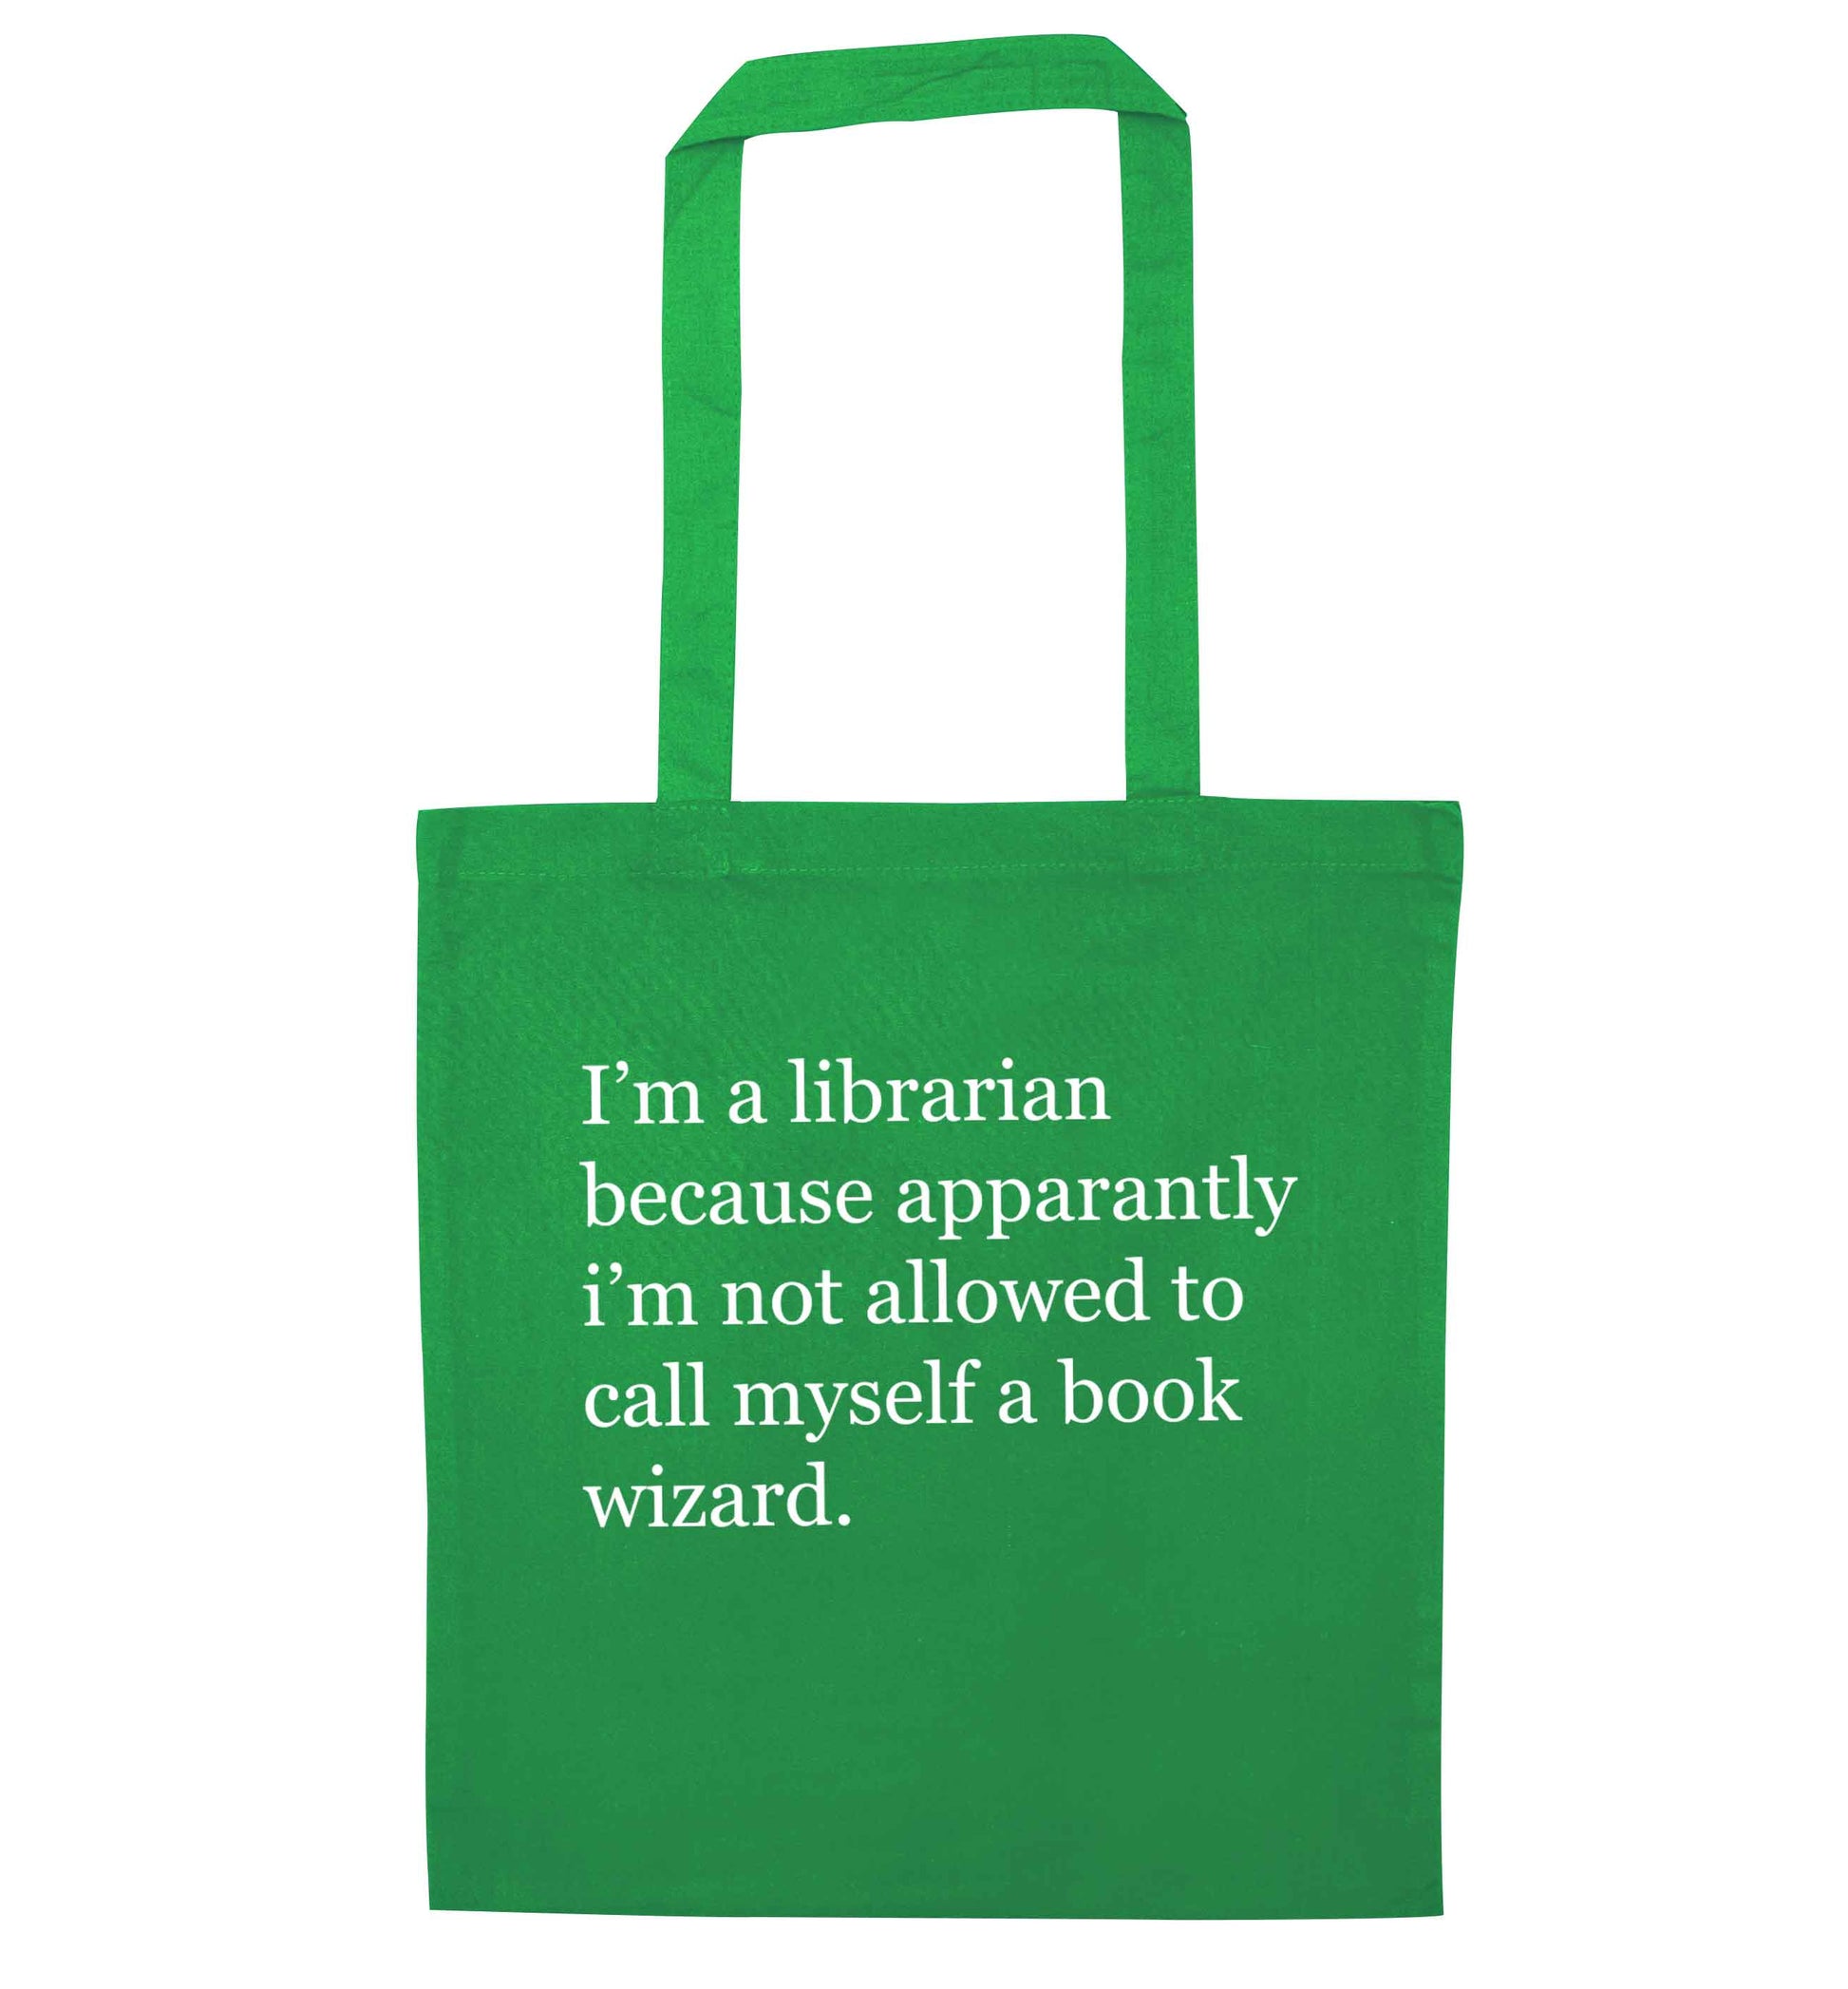 iÕm a librarian because apparantly iÕm not allowed to call myself a book wizard green tote bag